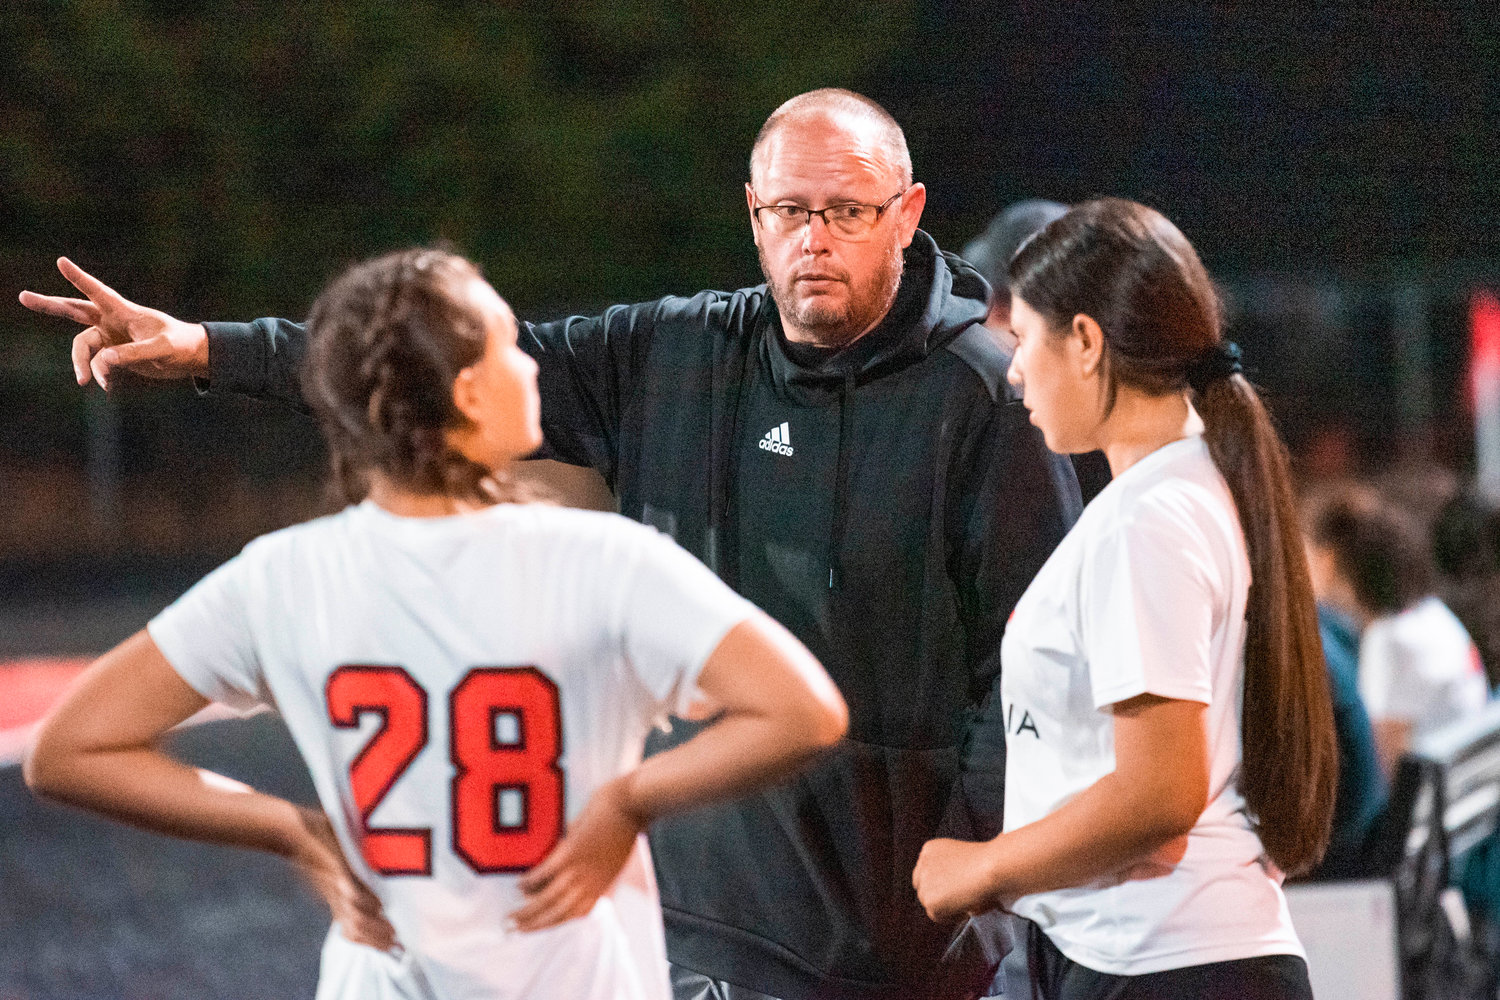 Centralia’s Head Coach Henry Gallanger talks to players Tuesday night at Beaver Stadium during a game against Tenino.